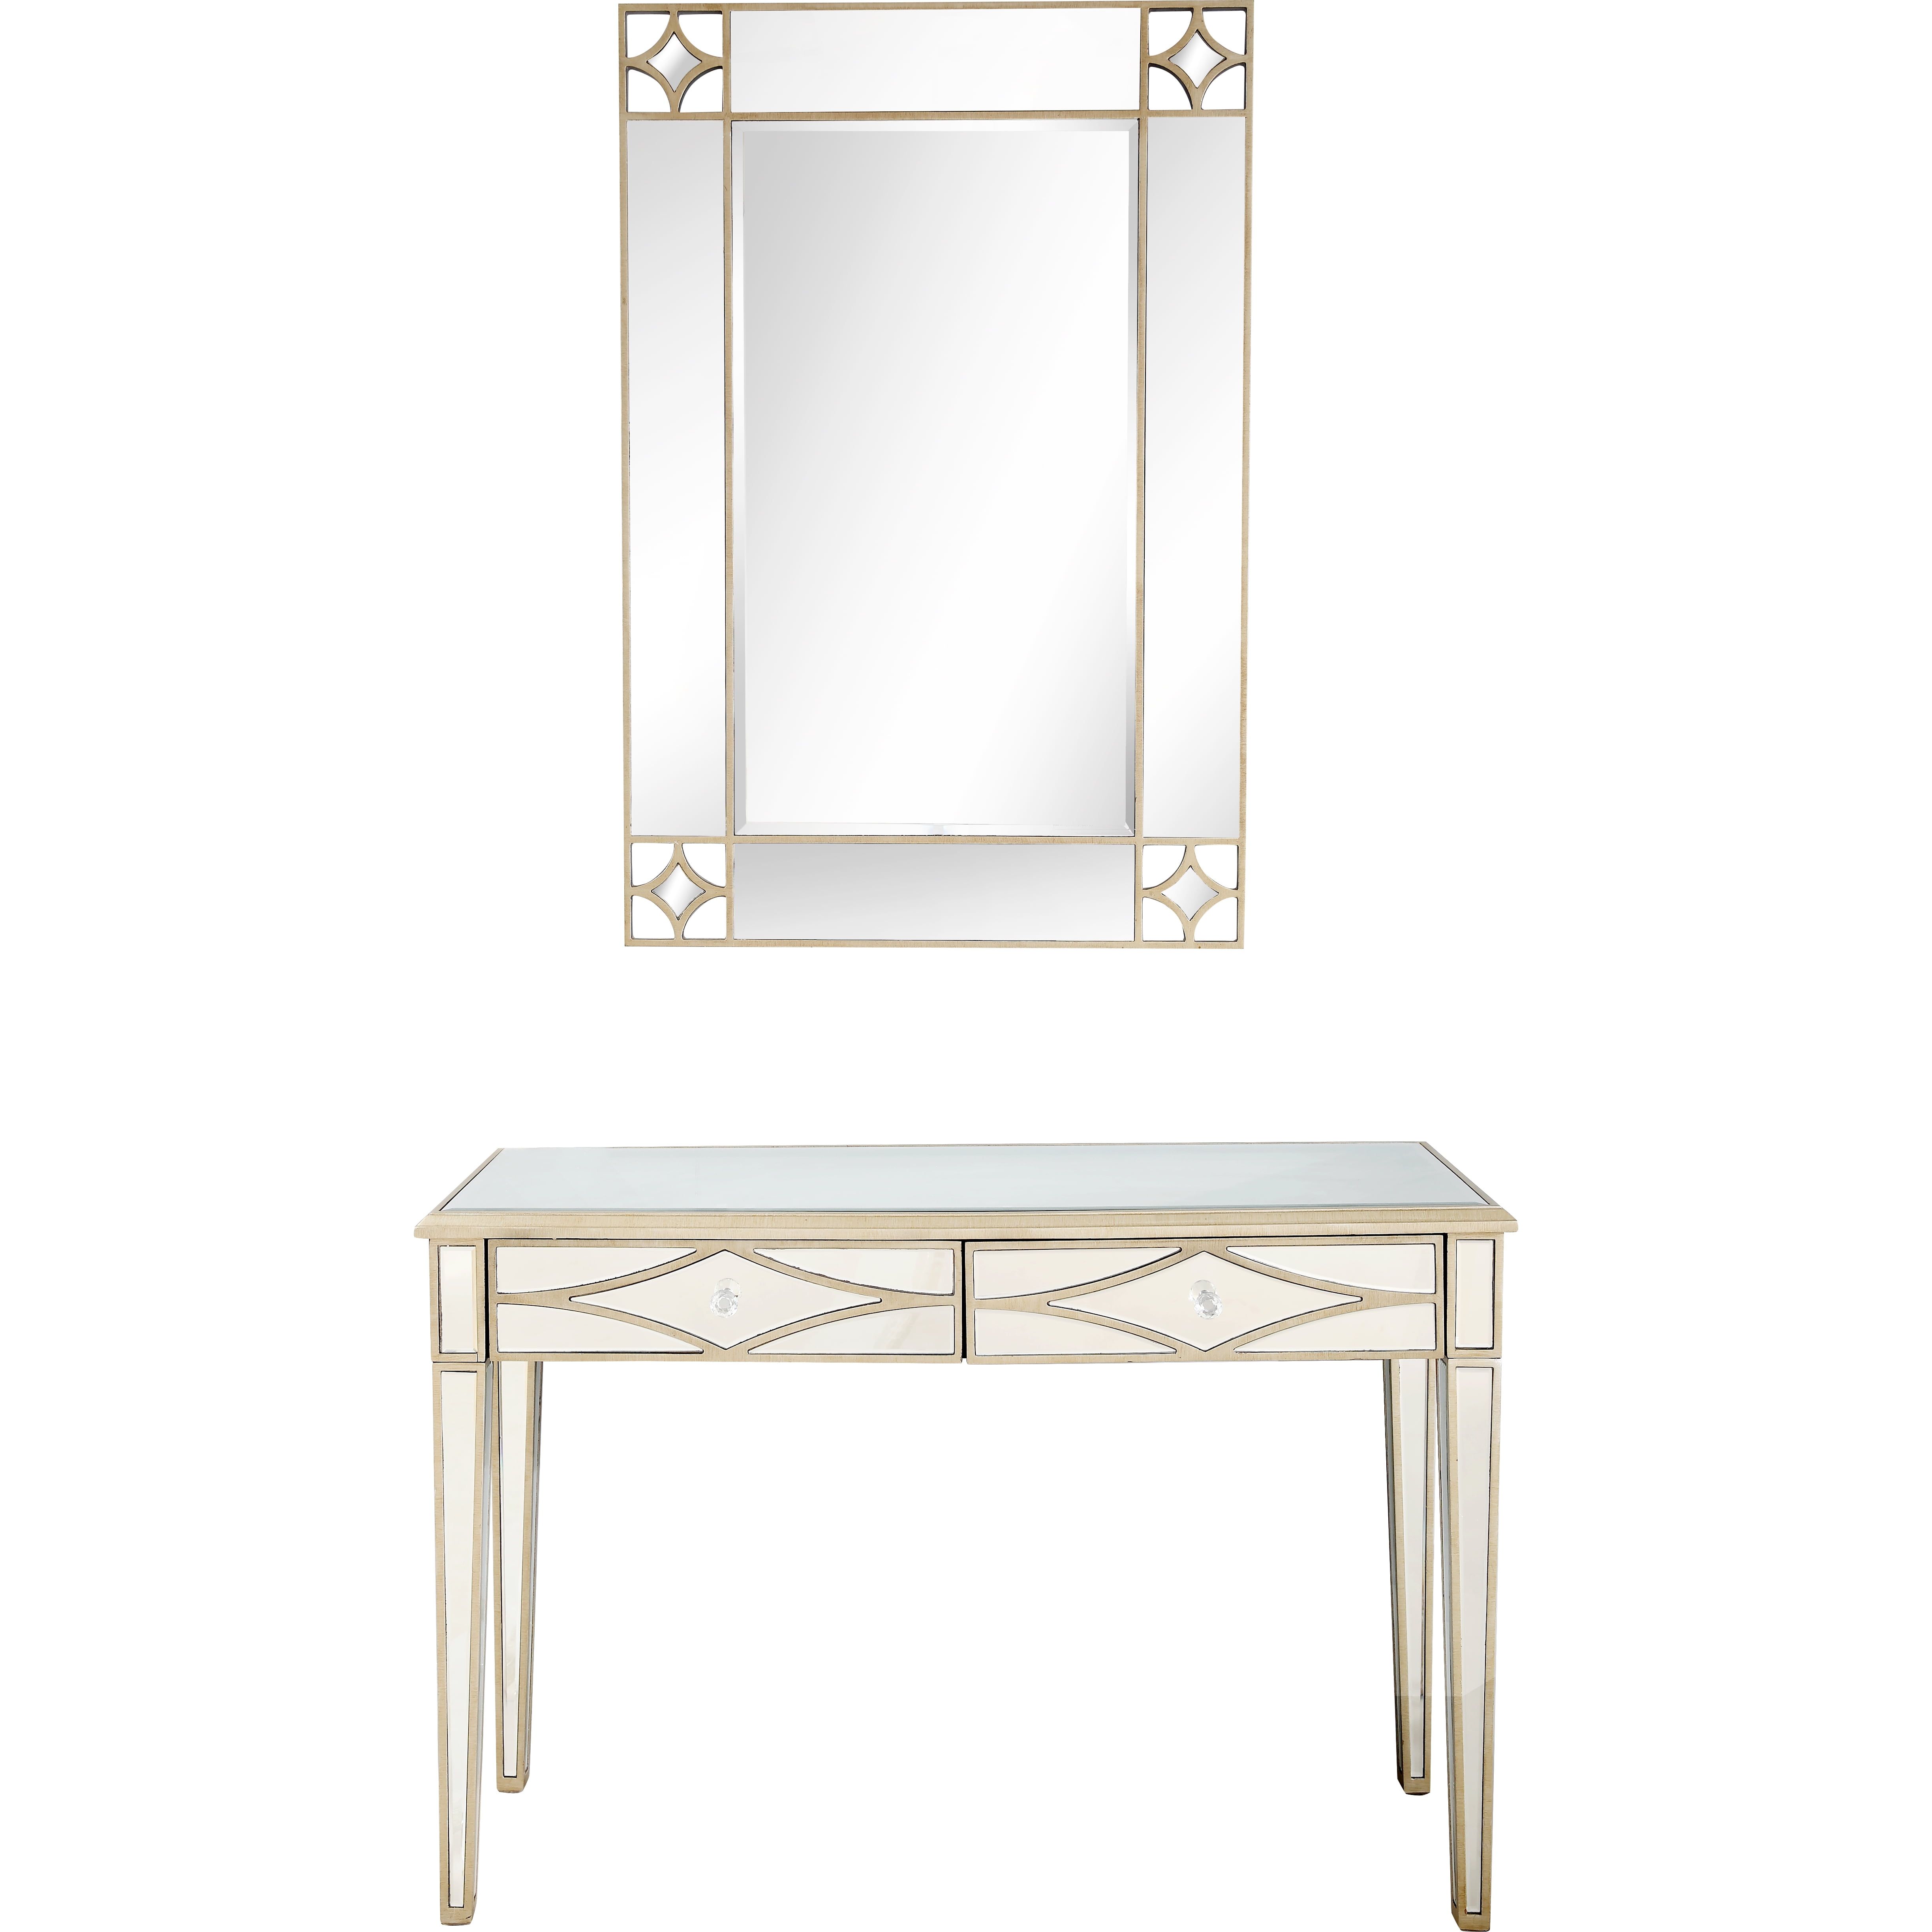 Picture of Camden Isle 86440 Huxley Wall Mirror and Console Table